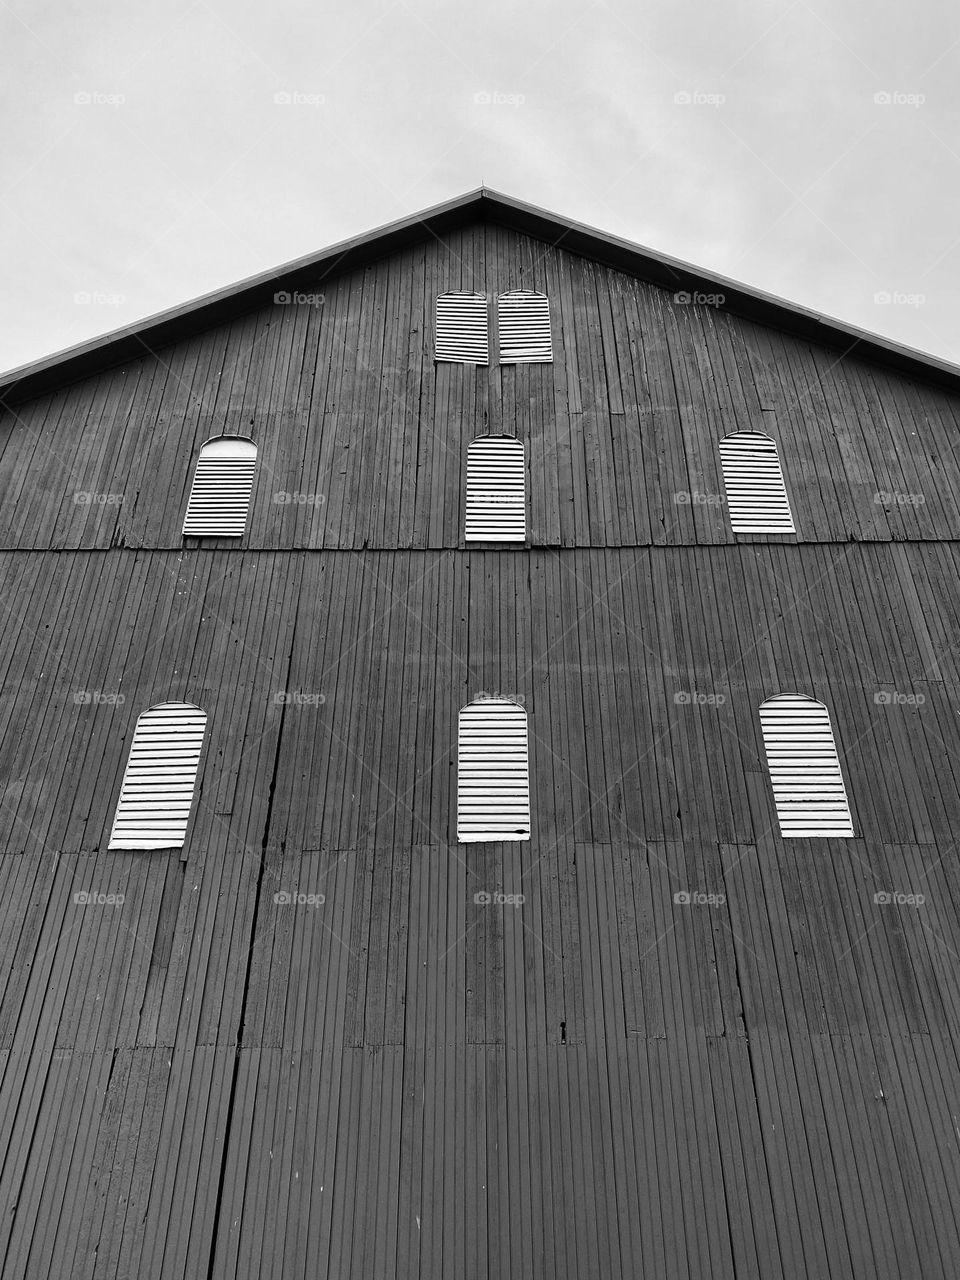 Windows in the side of a barn